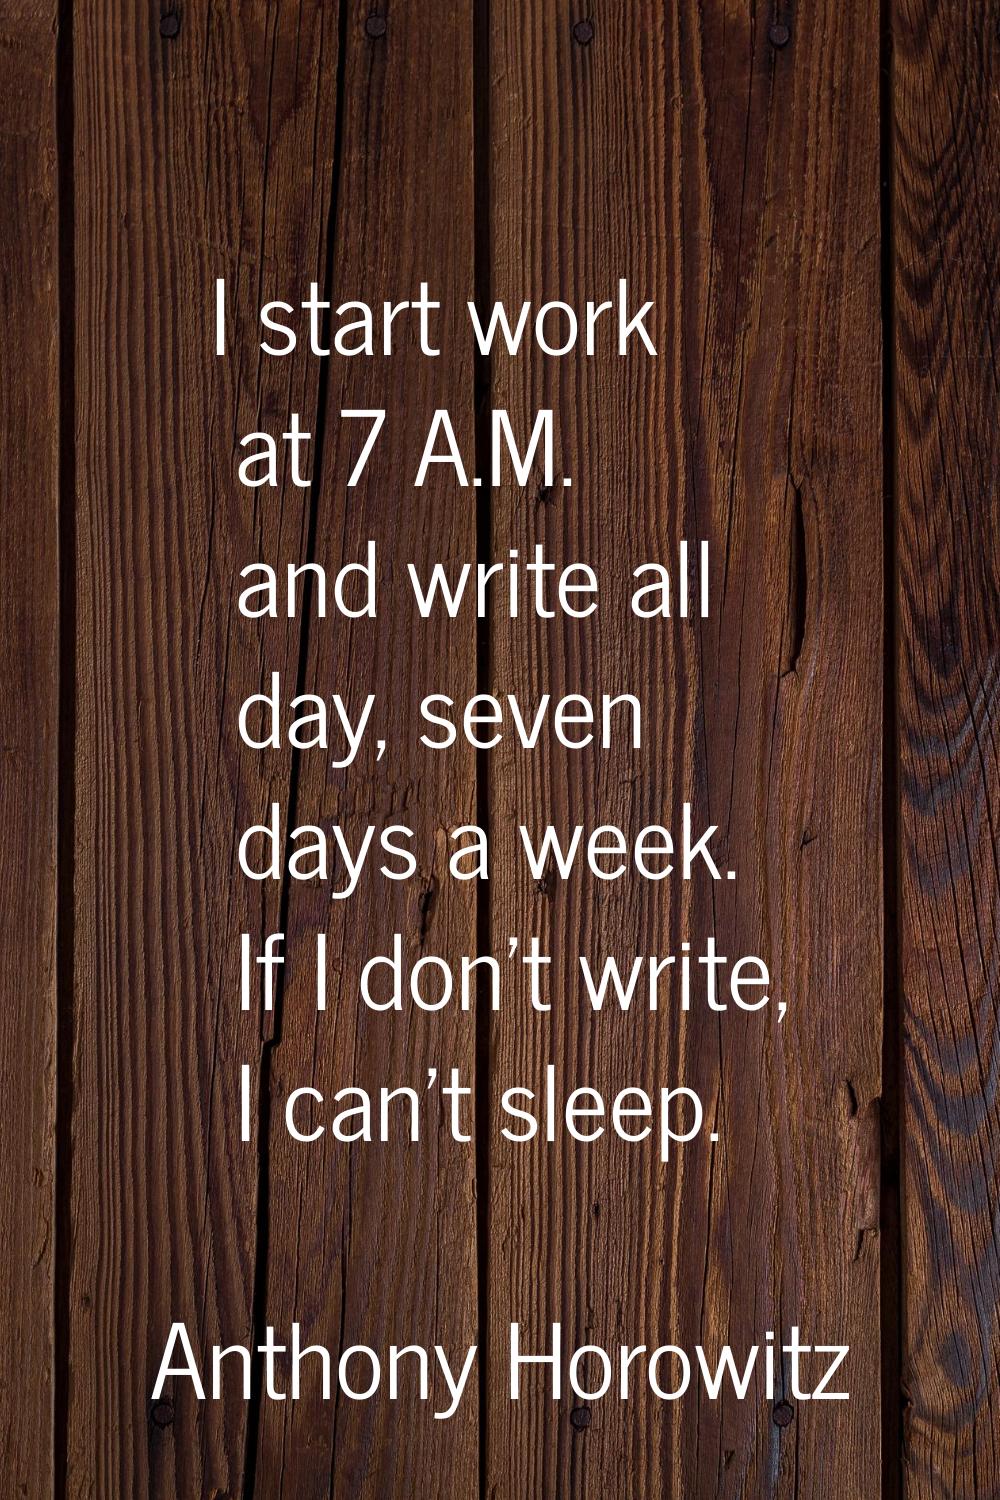 I start work at 7 A.M. and write all day, seven days a week. If I don't write, I can't sleep.